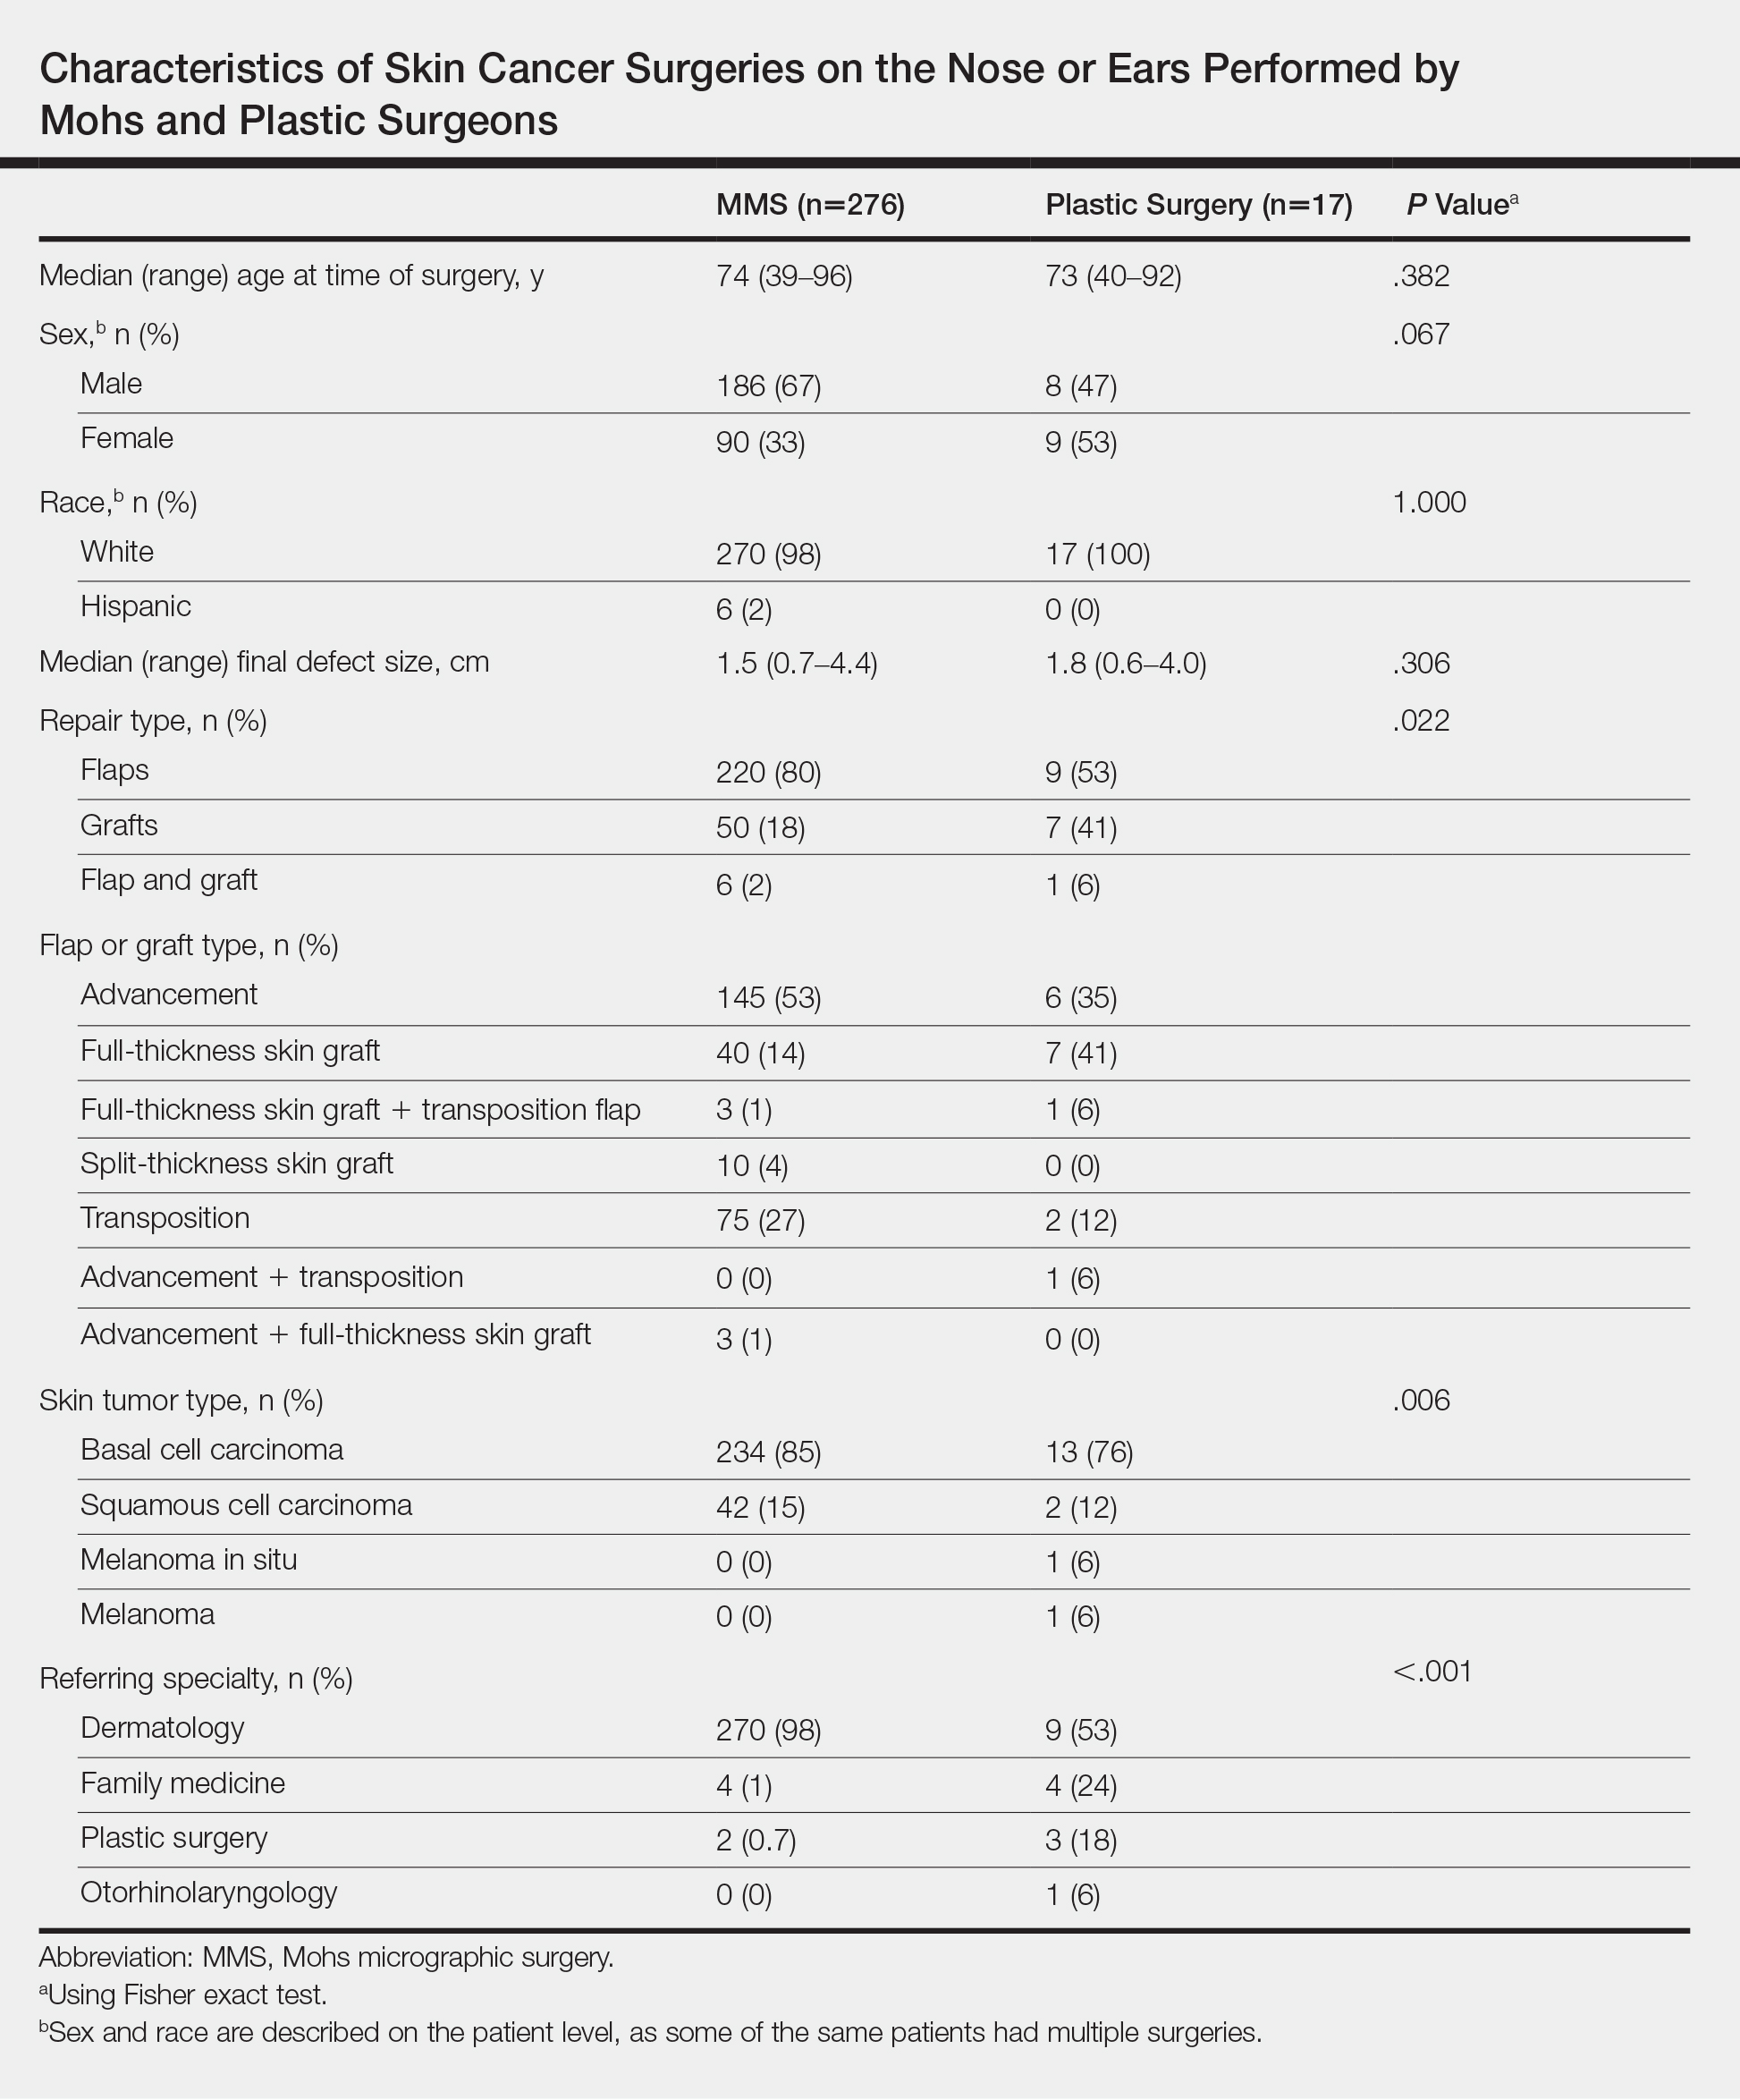 Quantity and Characteristics of Flap or Graft Repairs for Skin Cancer on  the Nose or Ears: A Comparison Between Mohs Micrographic Surgery and  Plastic Surgery